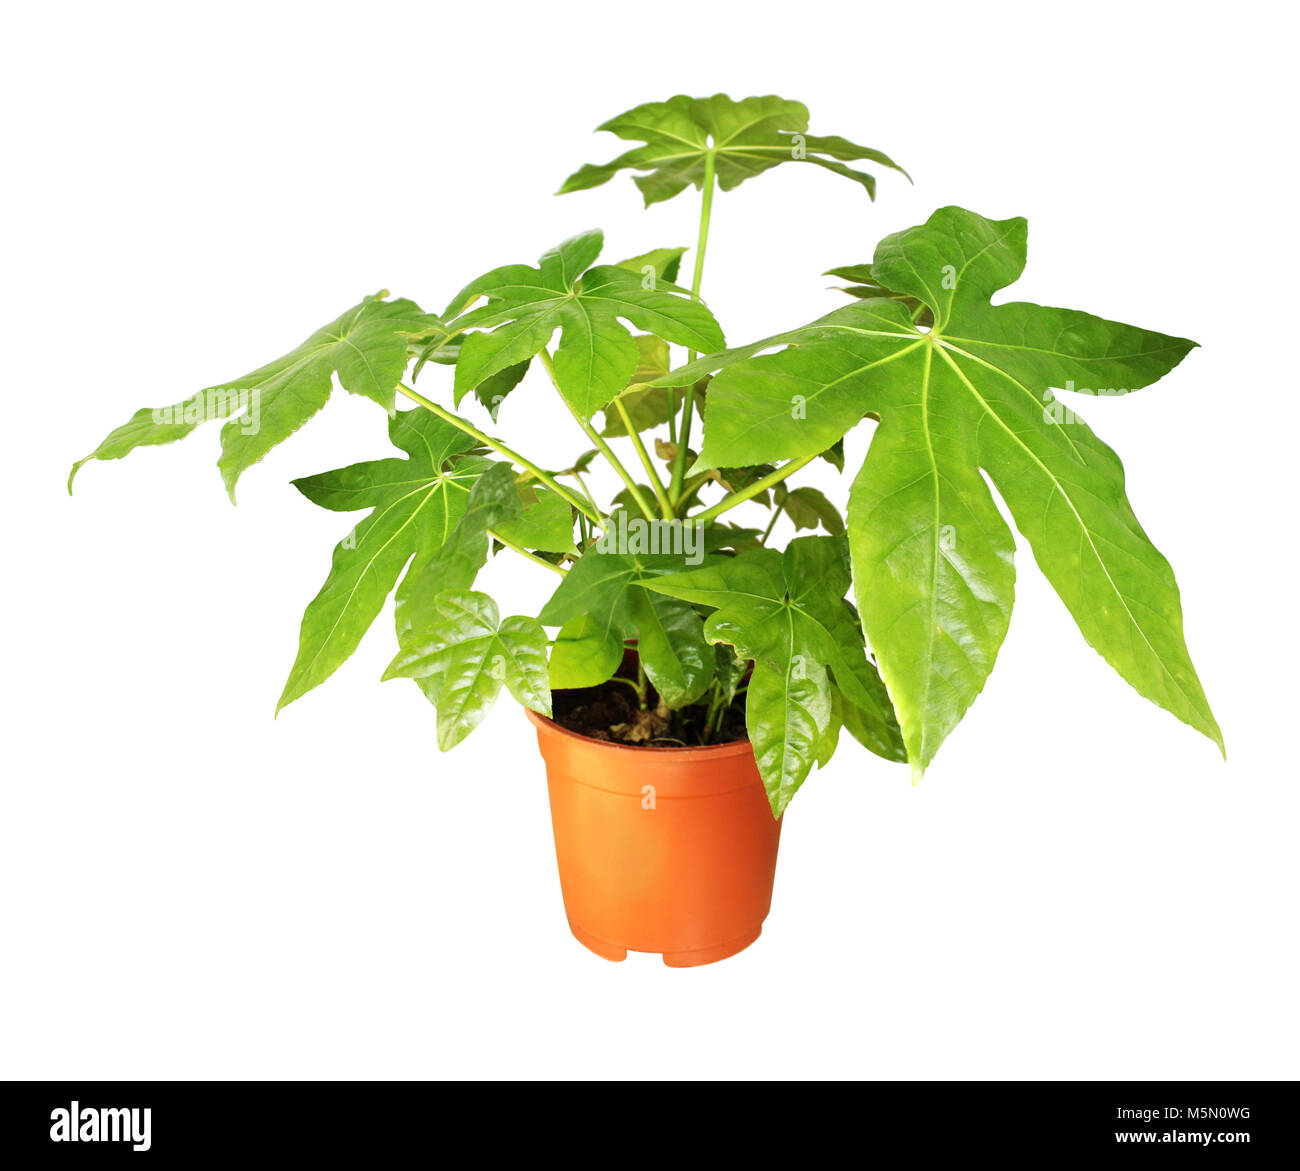 Decorative home plant Japanese fatsia (Fatsia japonica) in a pot. Isolated on white background Stock Photo